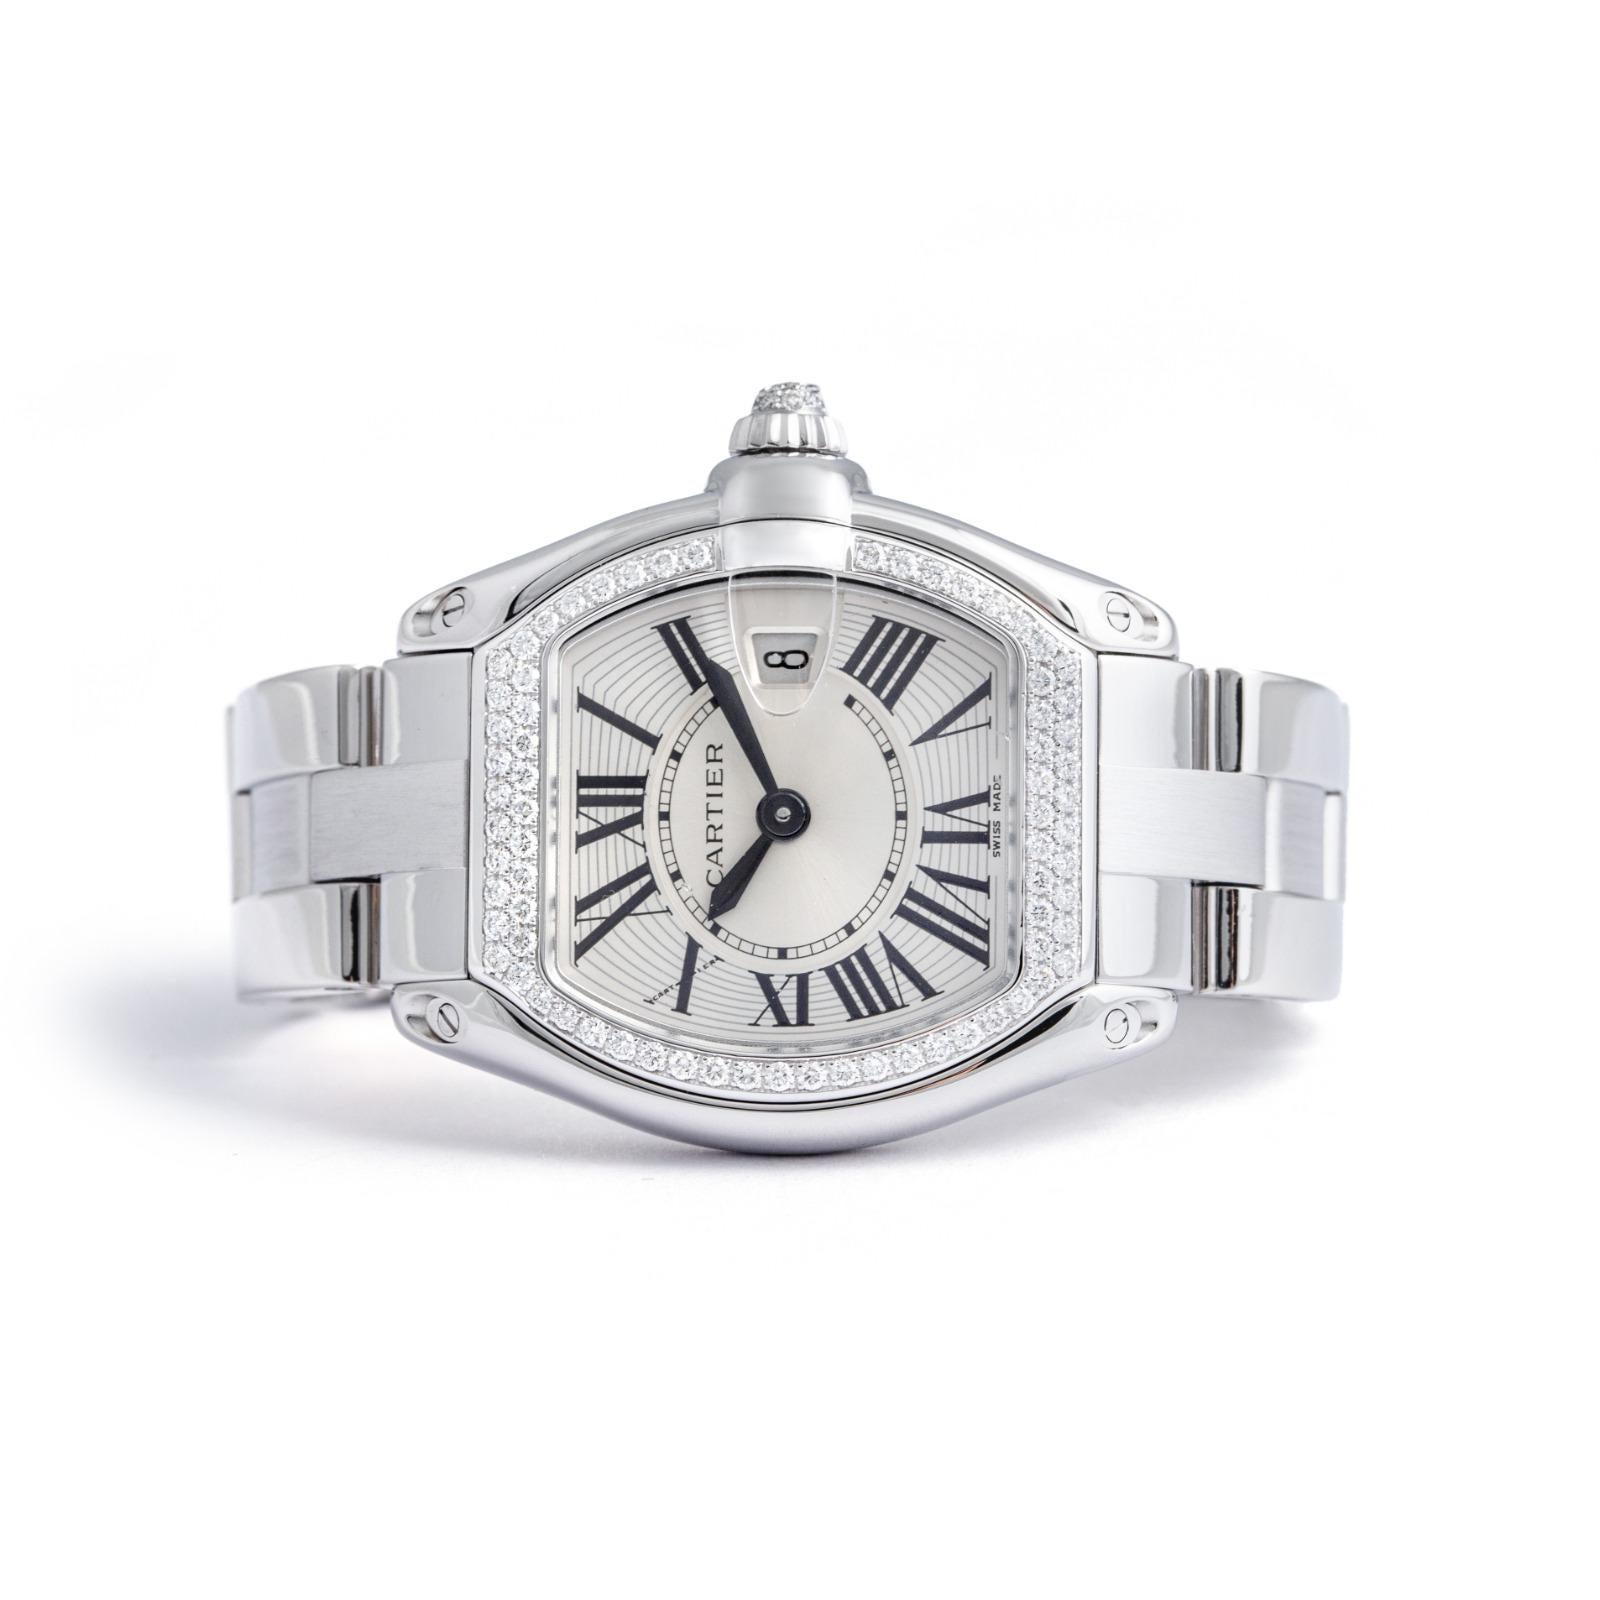 Cartier Roadster Diamond White Gold 18K Wristwatch.
Signed Cartier, numbered and marked.

Fully polished, movement is working at the moment of the listing.


